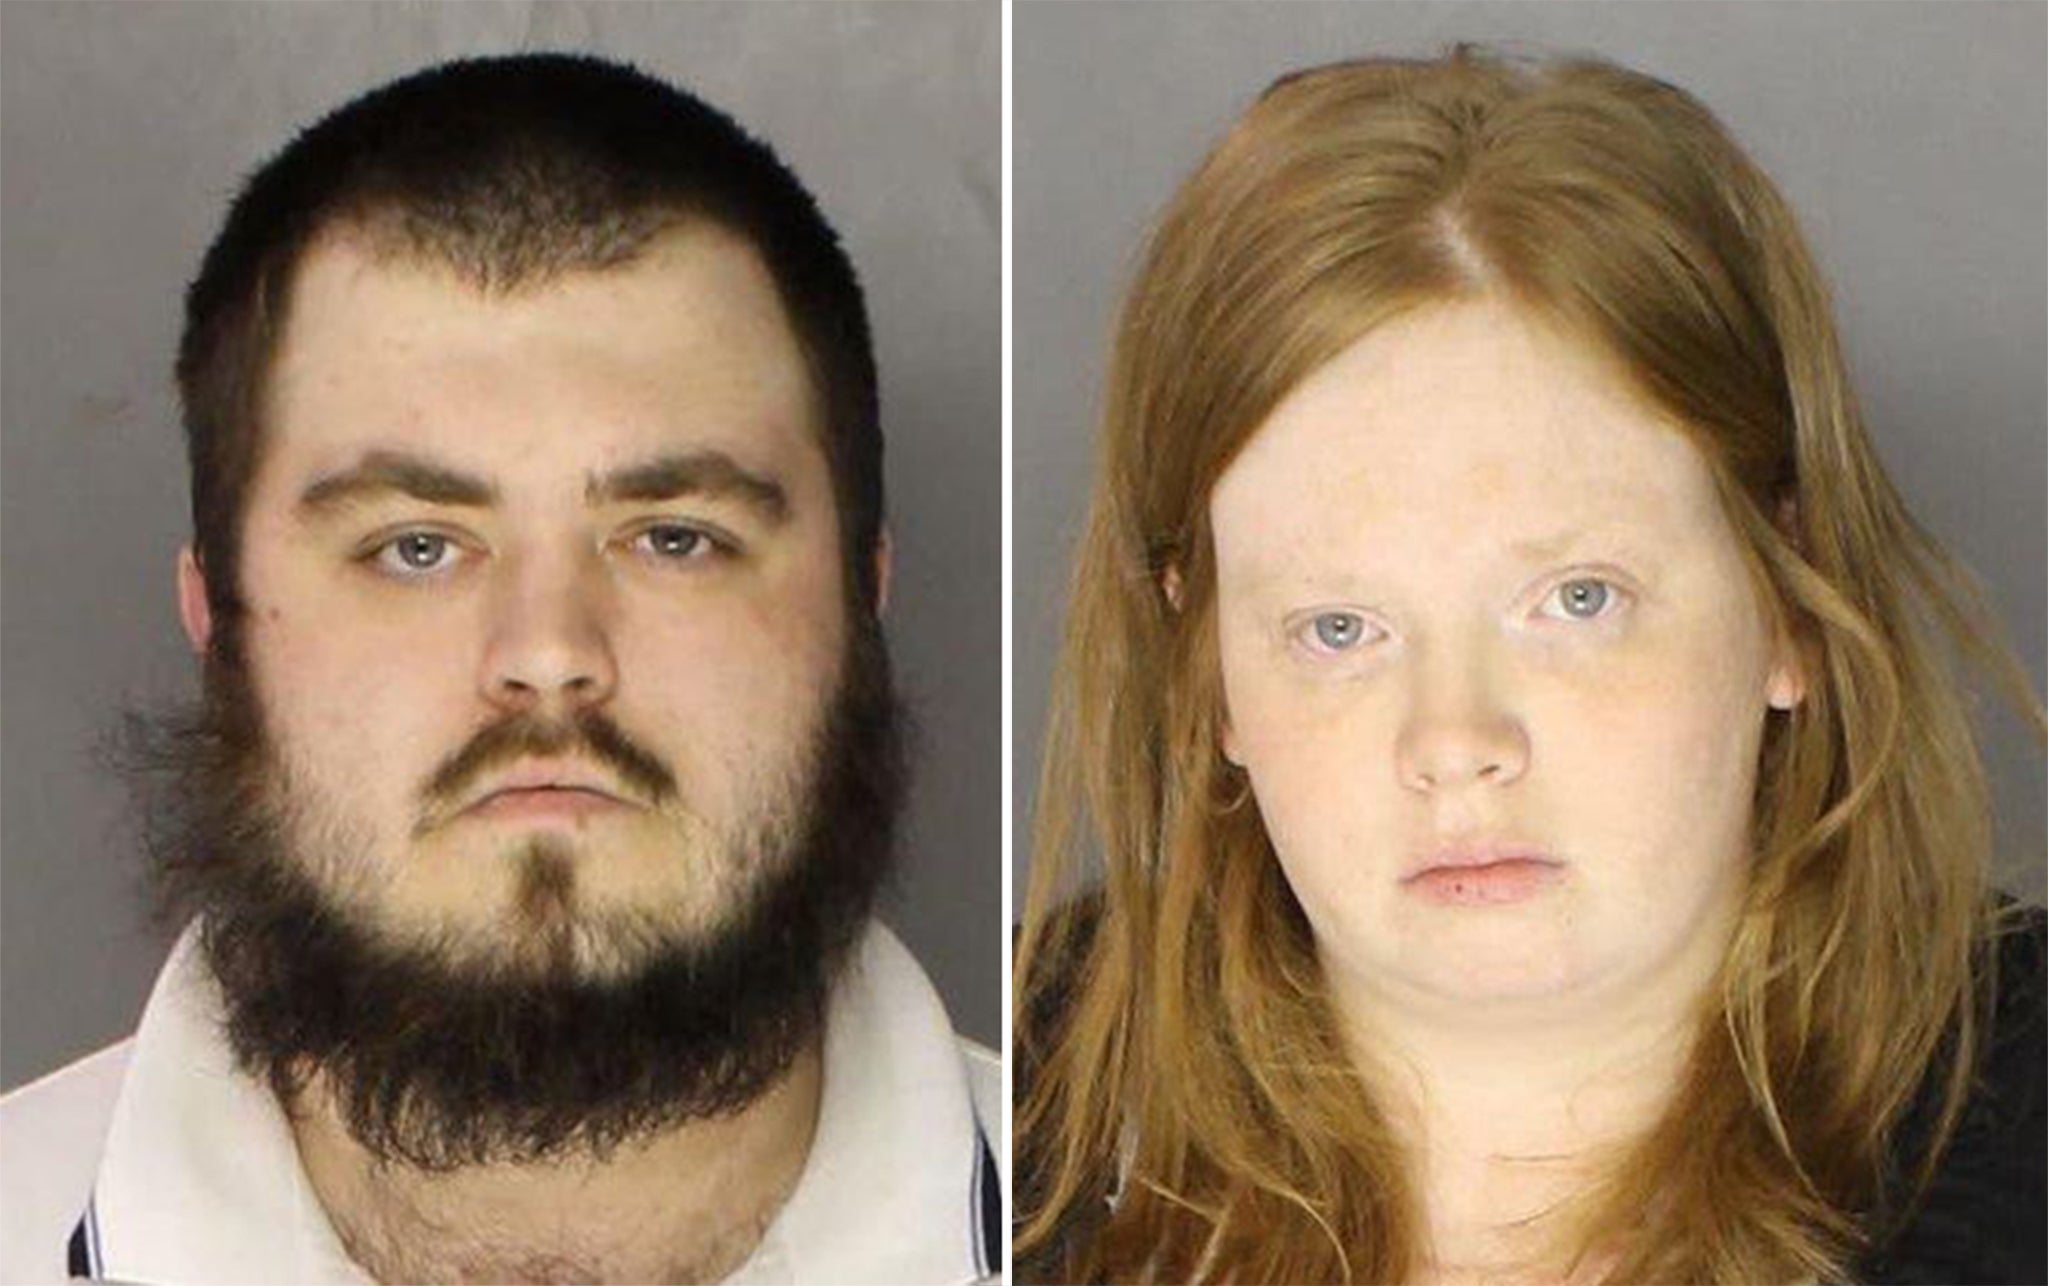 Gary Lee Fellenbaum III and his girlfriend Jillian Tait, whose boy died after he was tortured by the pair